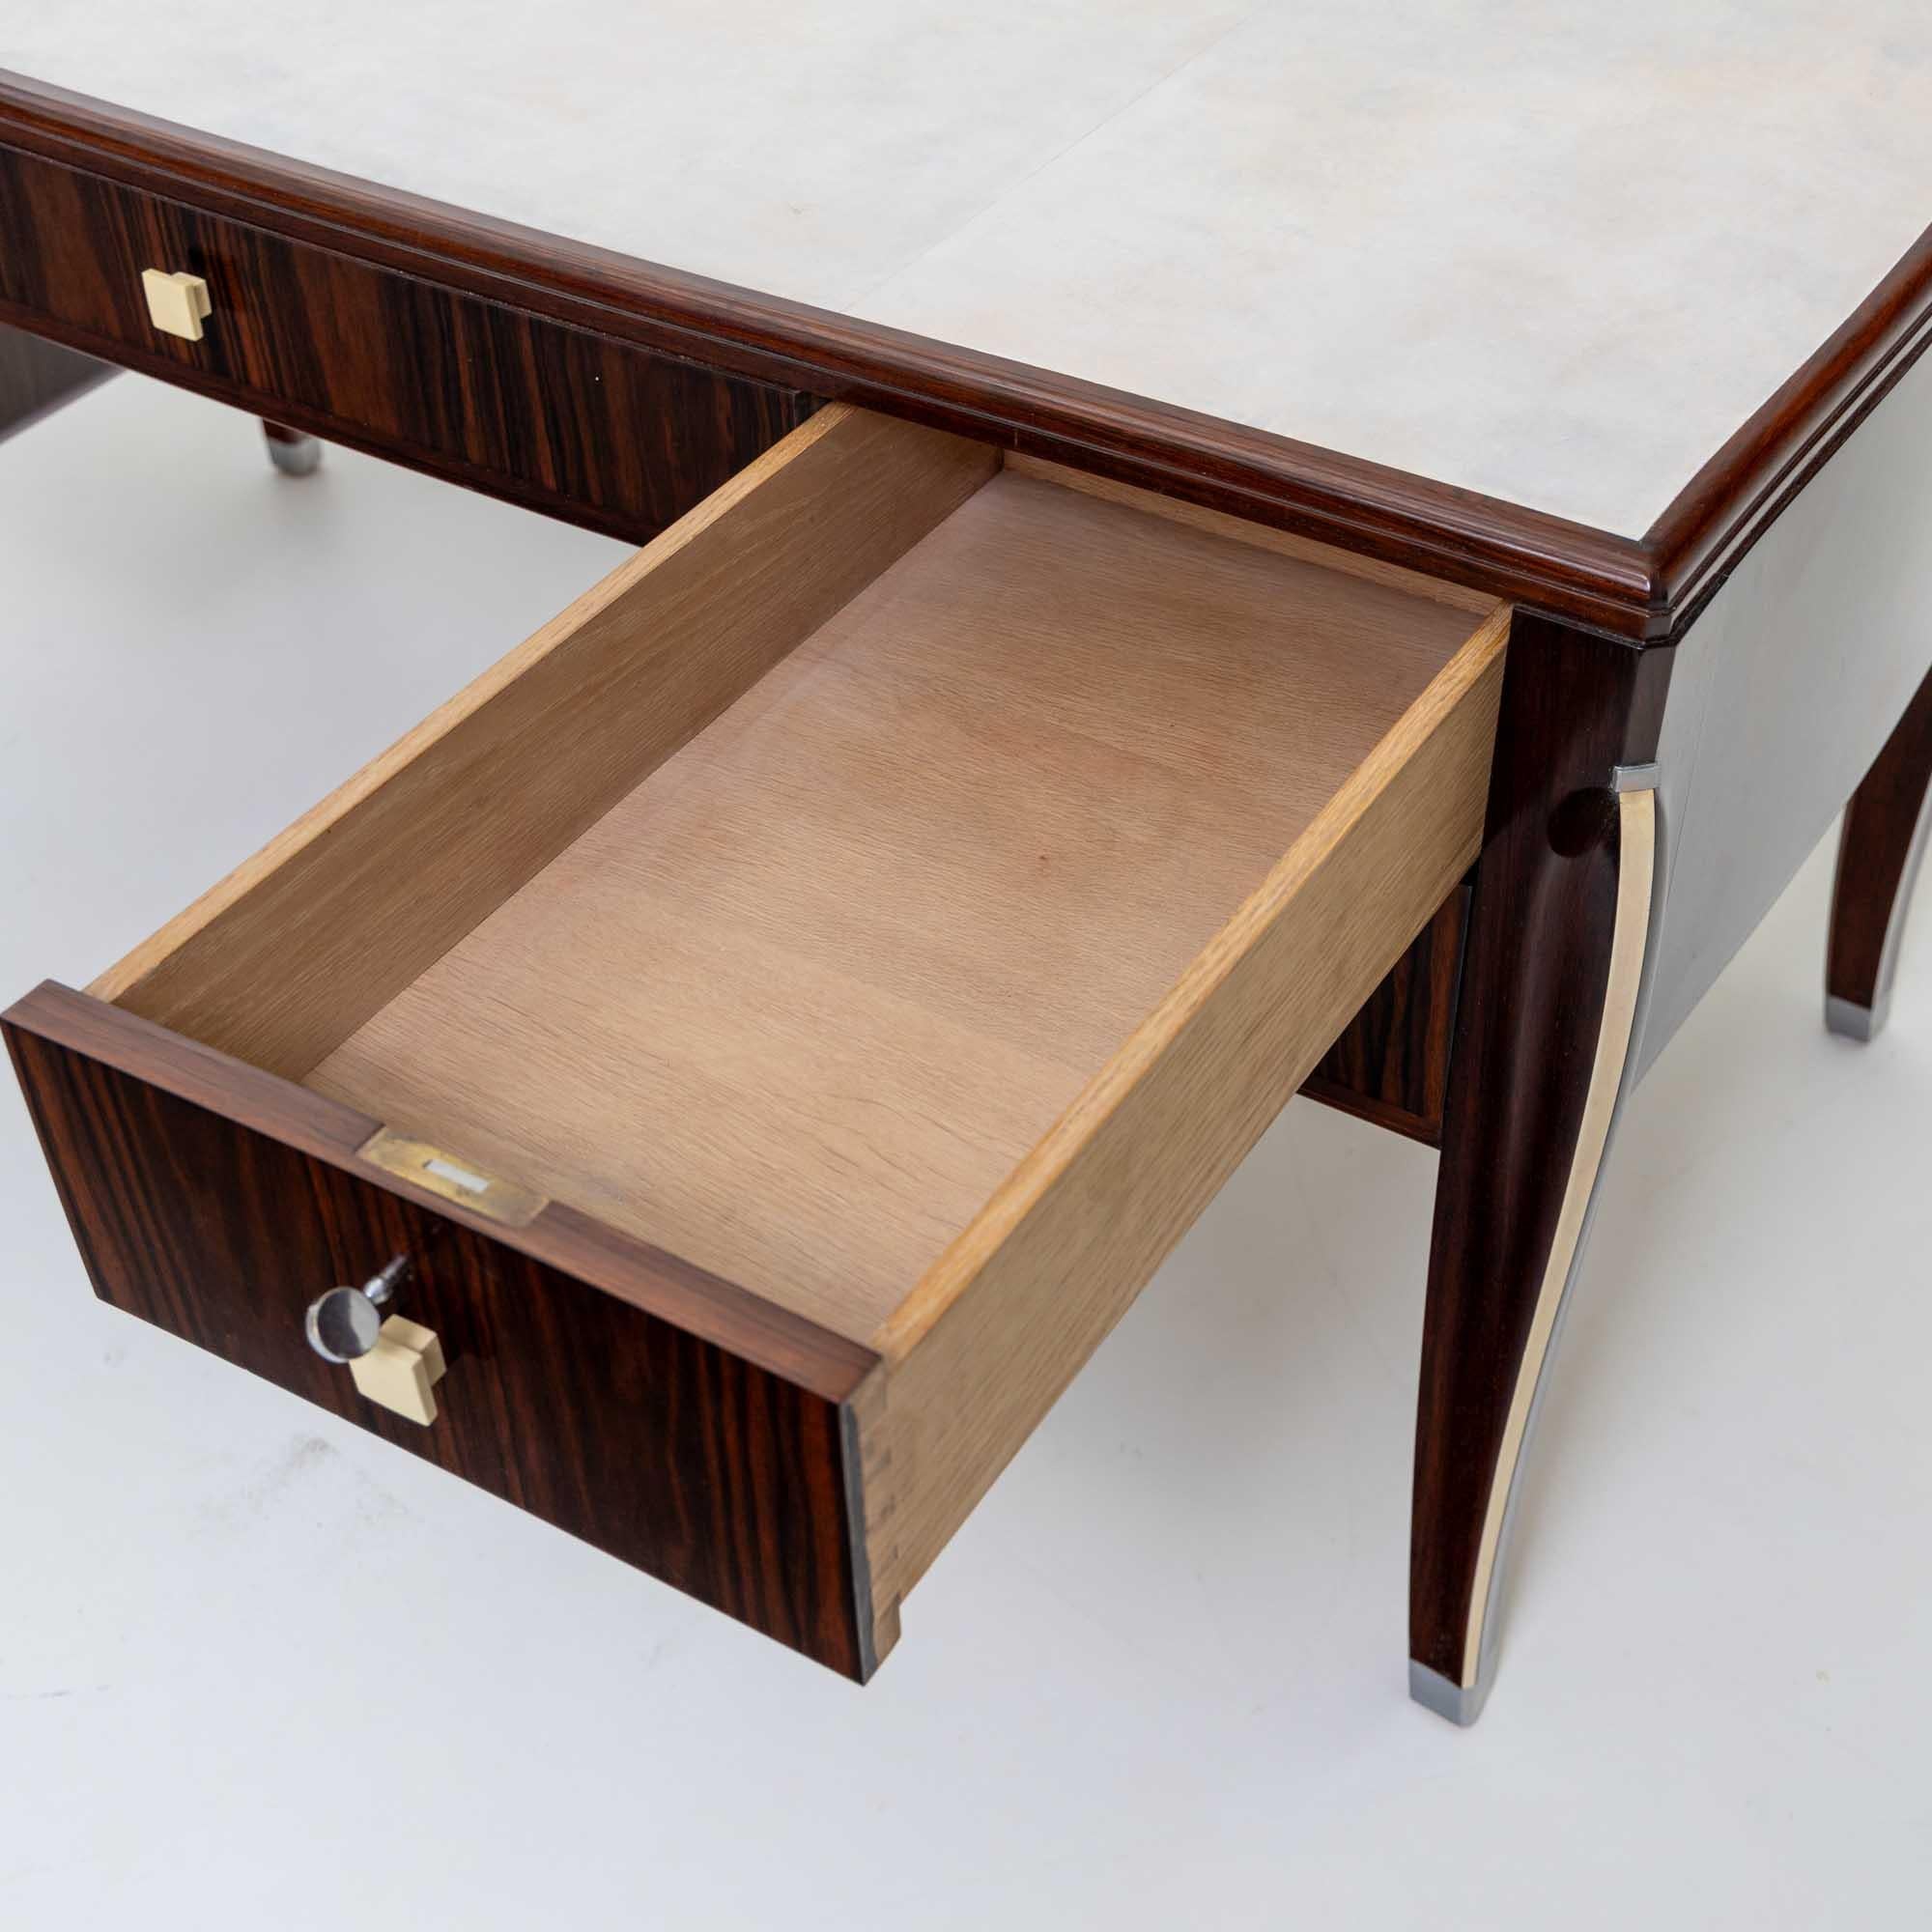 Art Deco Desk in the style of Jacques-Emile Ruhlmann (1879-1933), France, 1920s For Sale 13